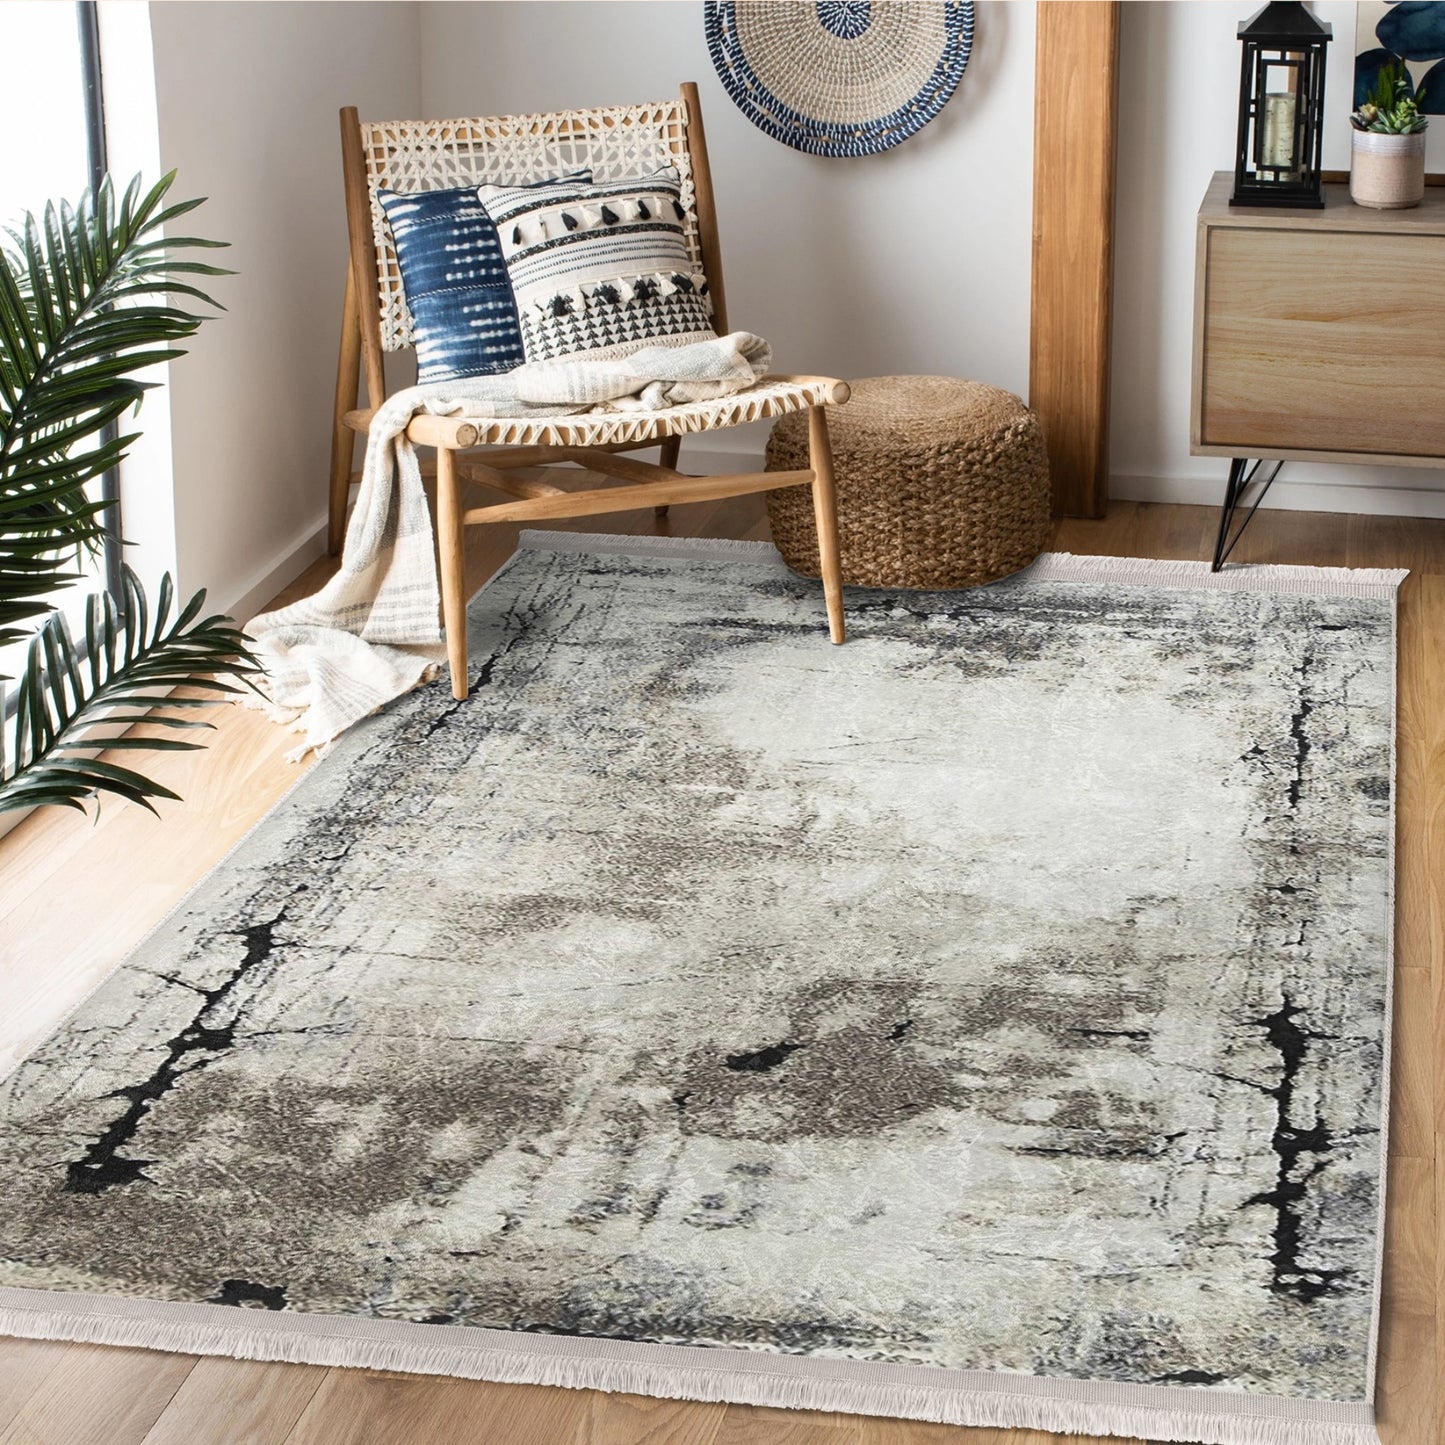 Decorative Area Rug with Rich Cultural Heritage Patterns